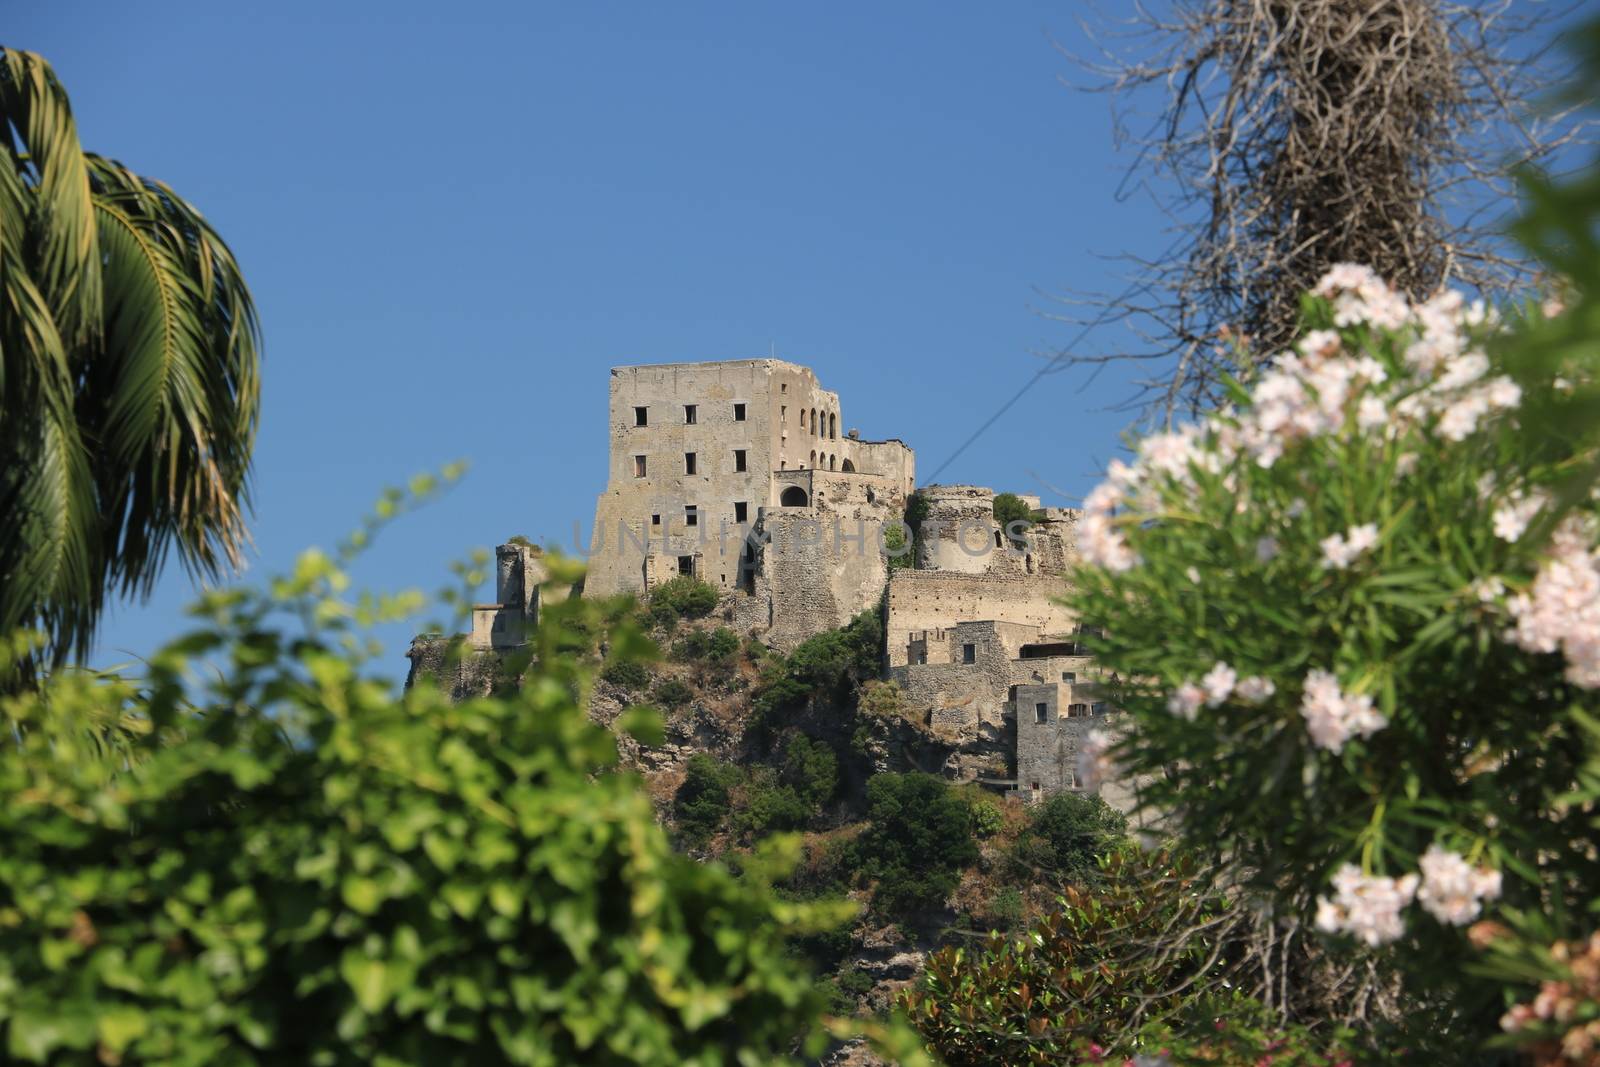 Ischia, Naples, Italy. Ancient Aragonese Castle in Ischia Ponte. The fortification stands on a peninsula of volcanic rock connected to the village of Ponte. Trees and flowers.